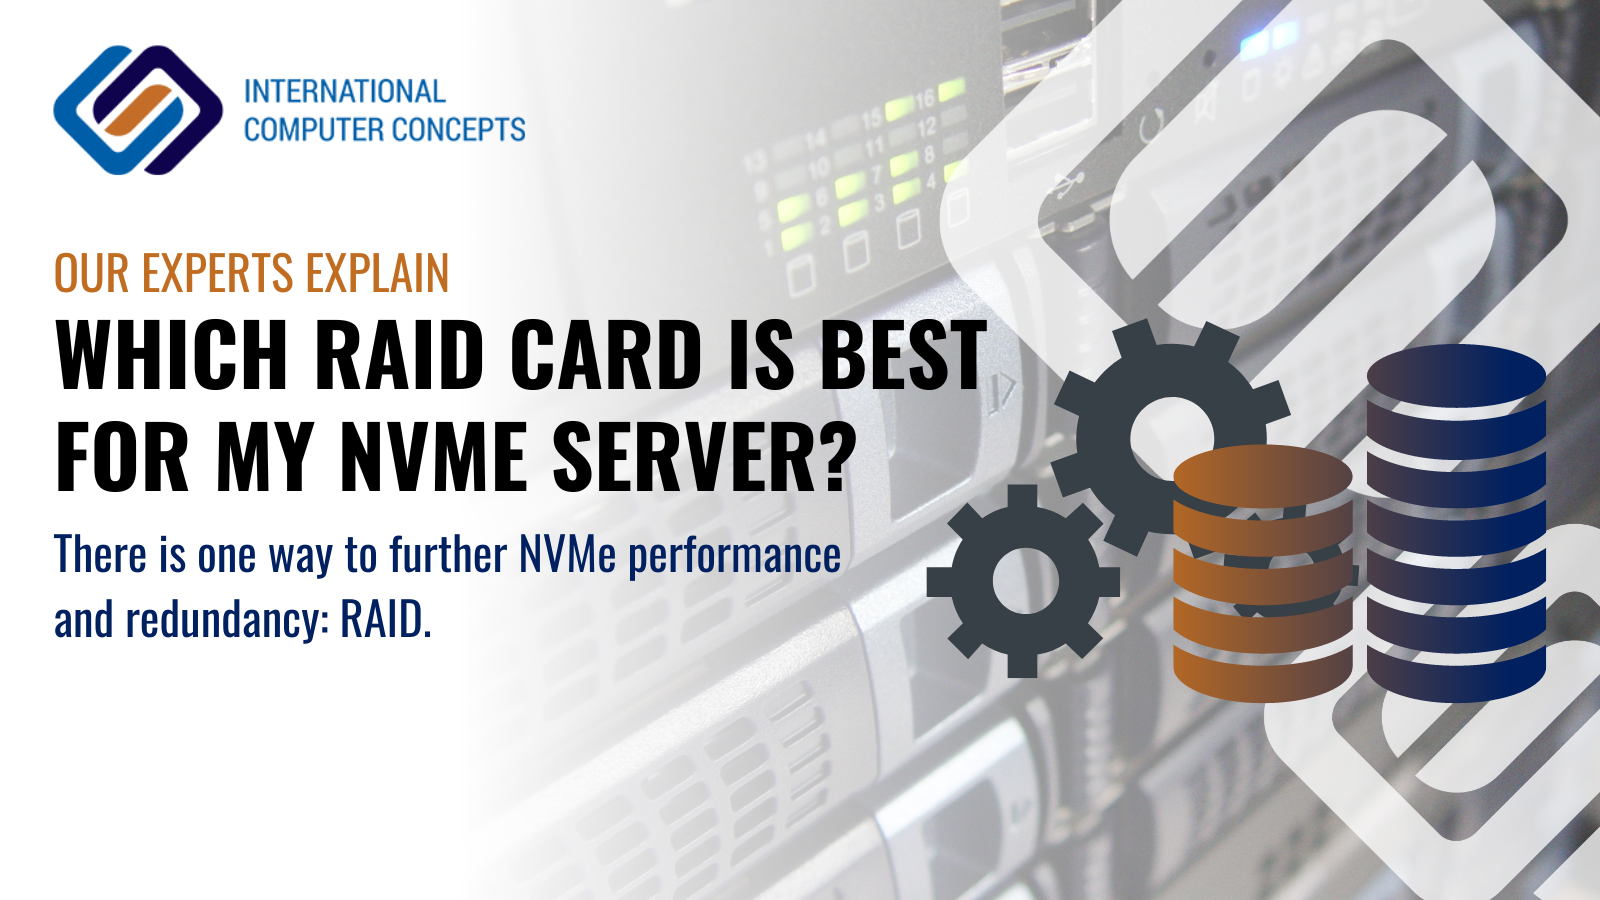 Which RAID card is good for my NVMe server?